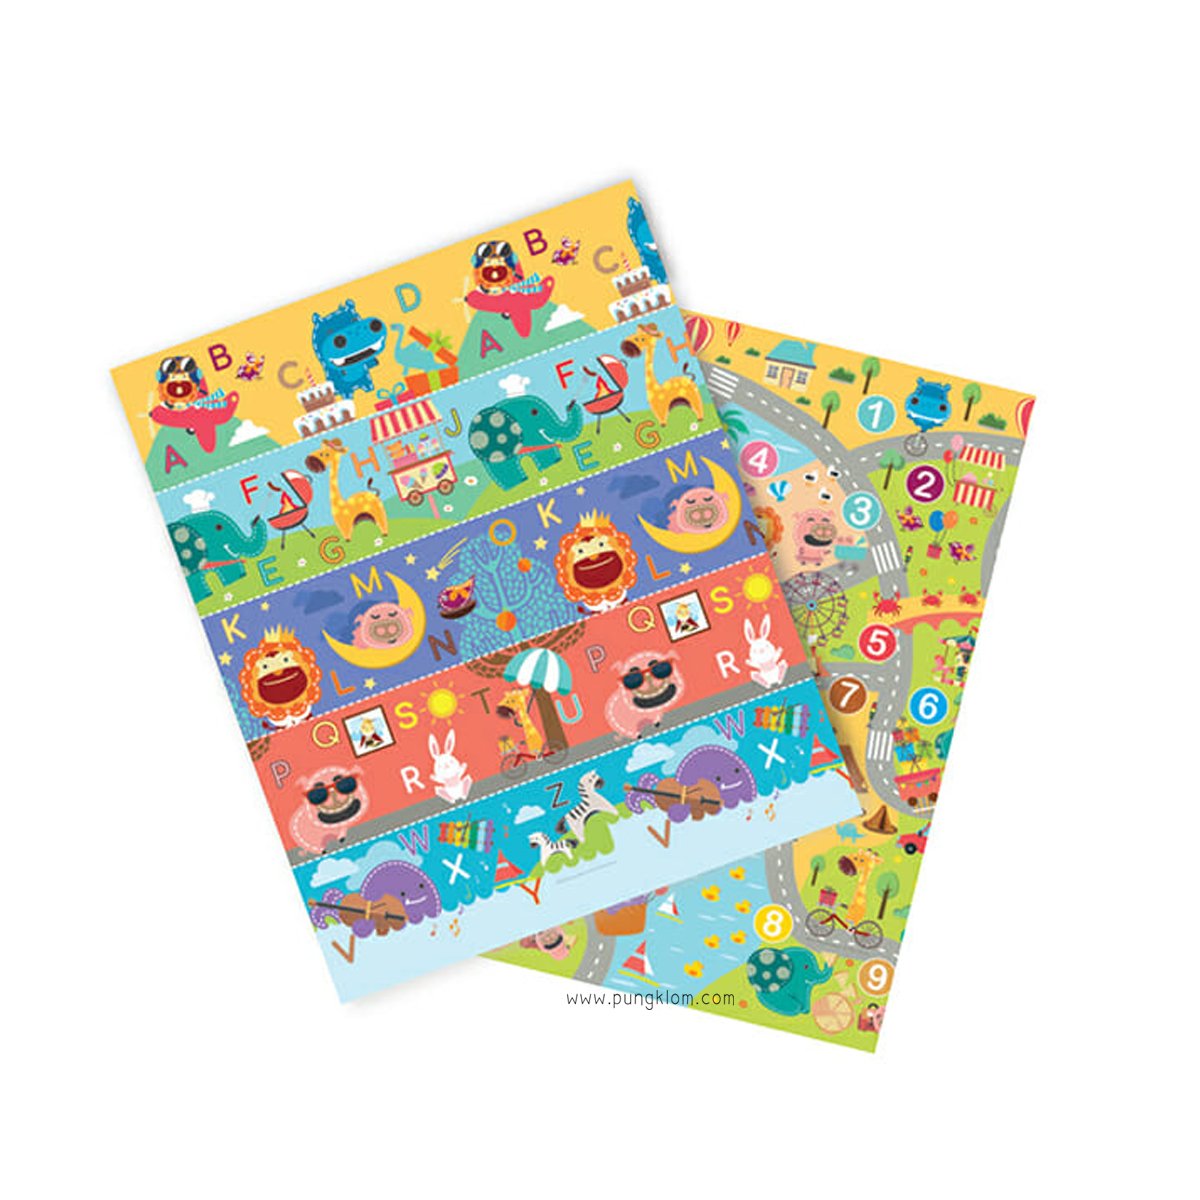 MARCUS & MARCUS -  REVERSIBLE PLAYMAT - COLORFUL